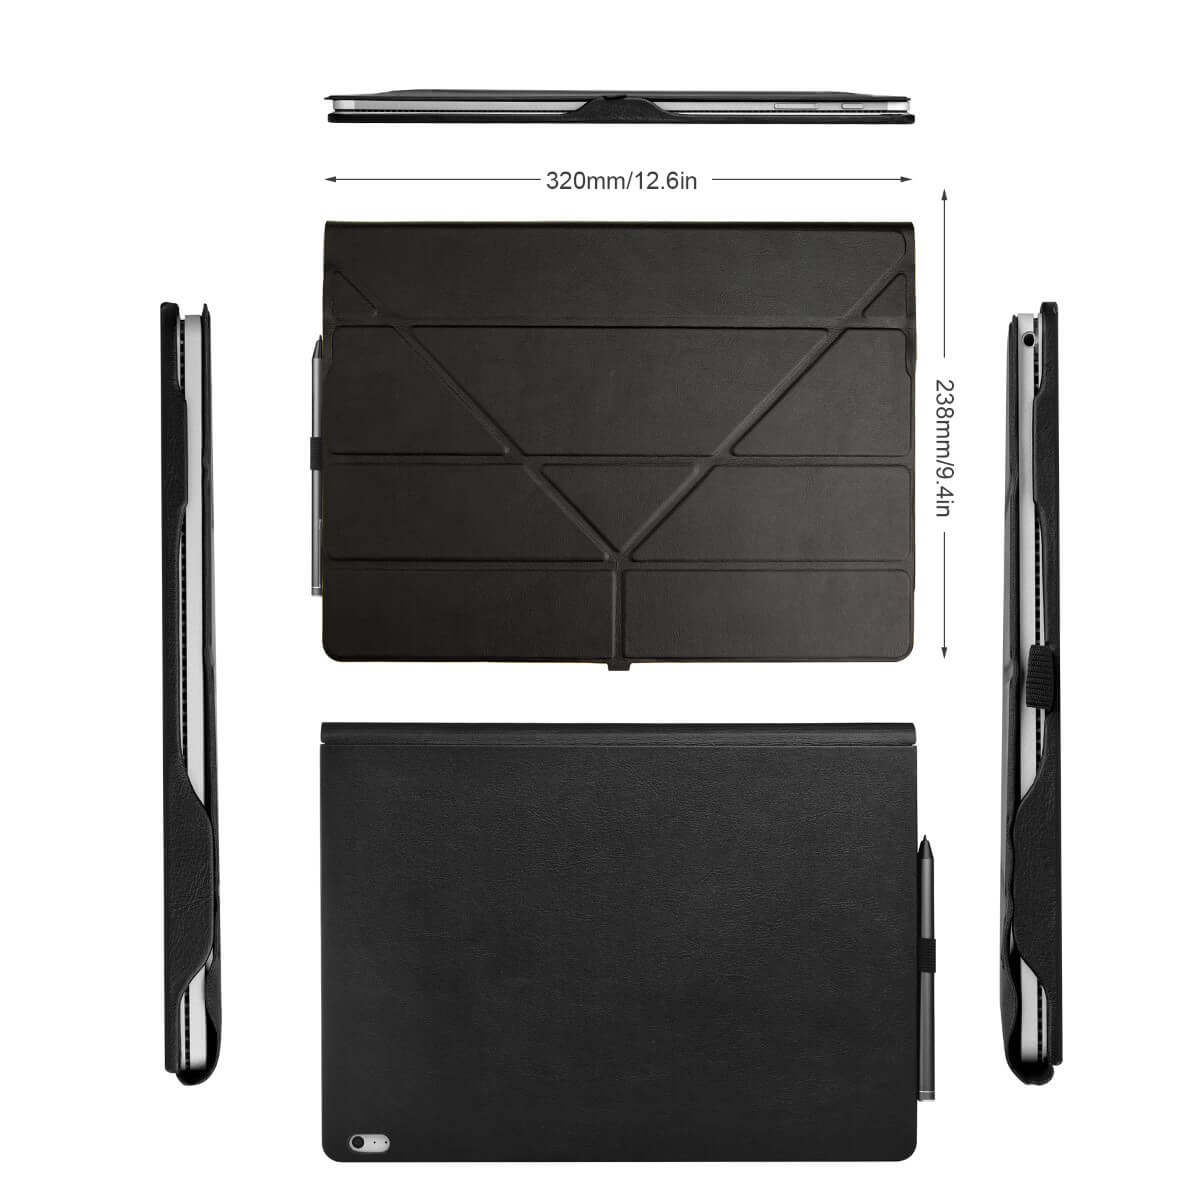 Microsoft Surface Book 3 13.5-inch foldable flip leather case_Surface Book 3 13,5-Zoll faltbare Ledertasche_size instruction